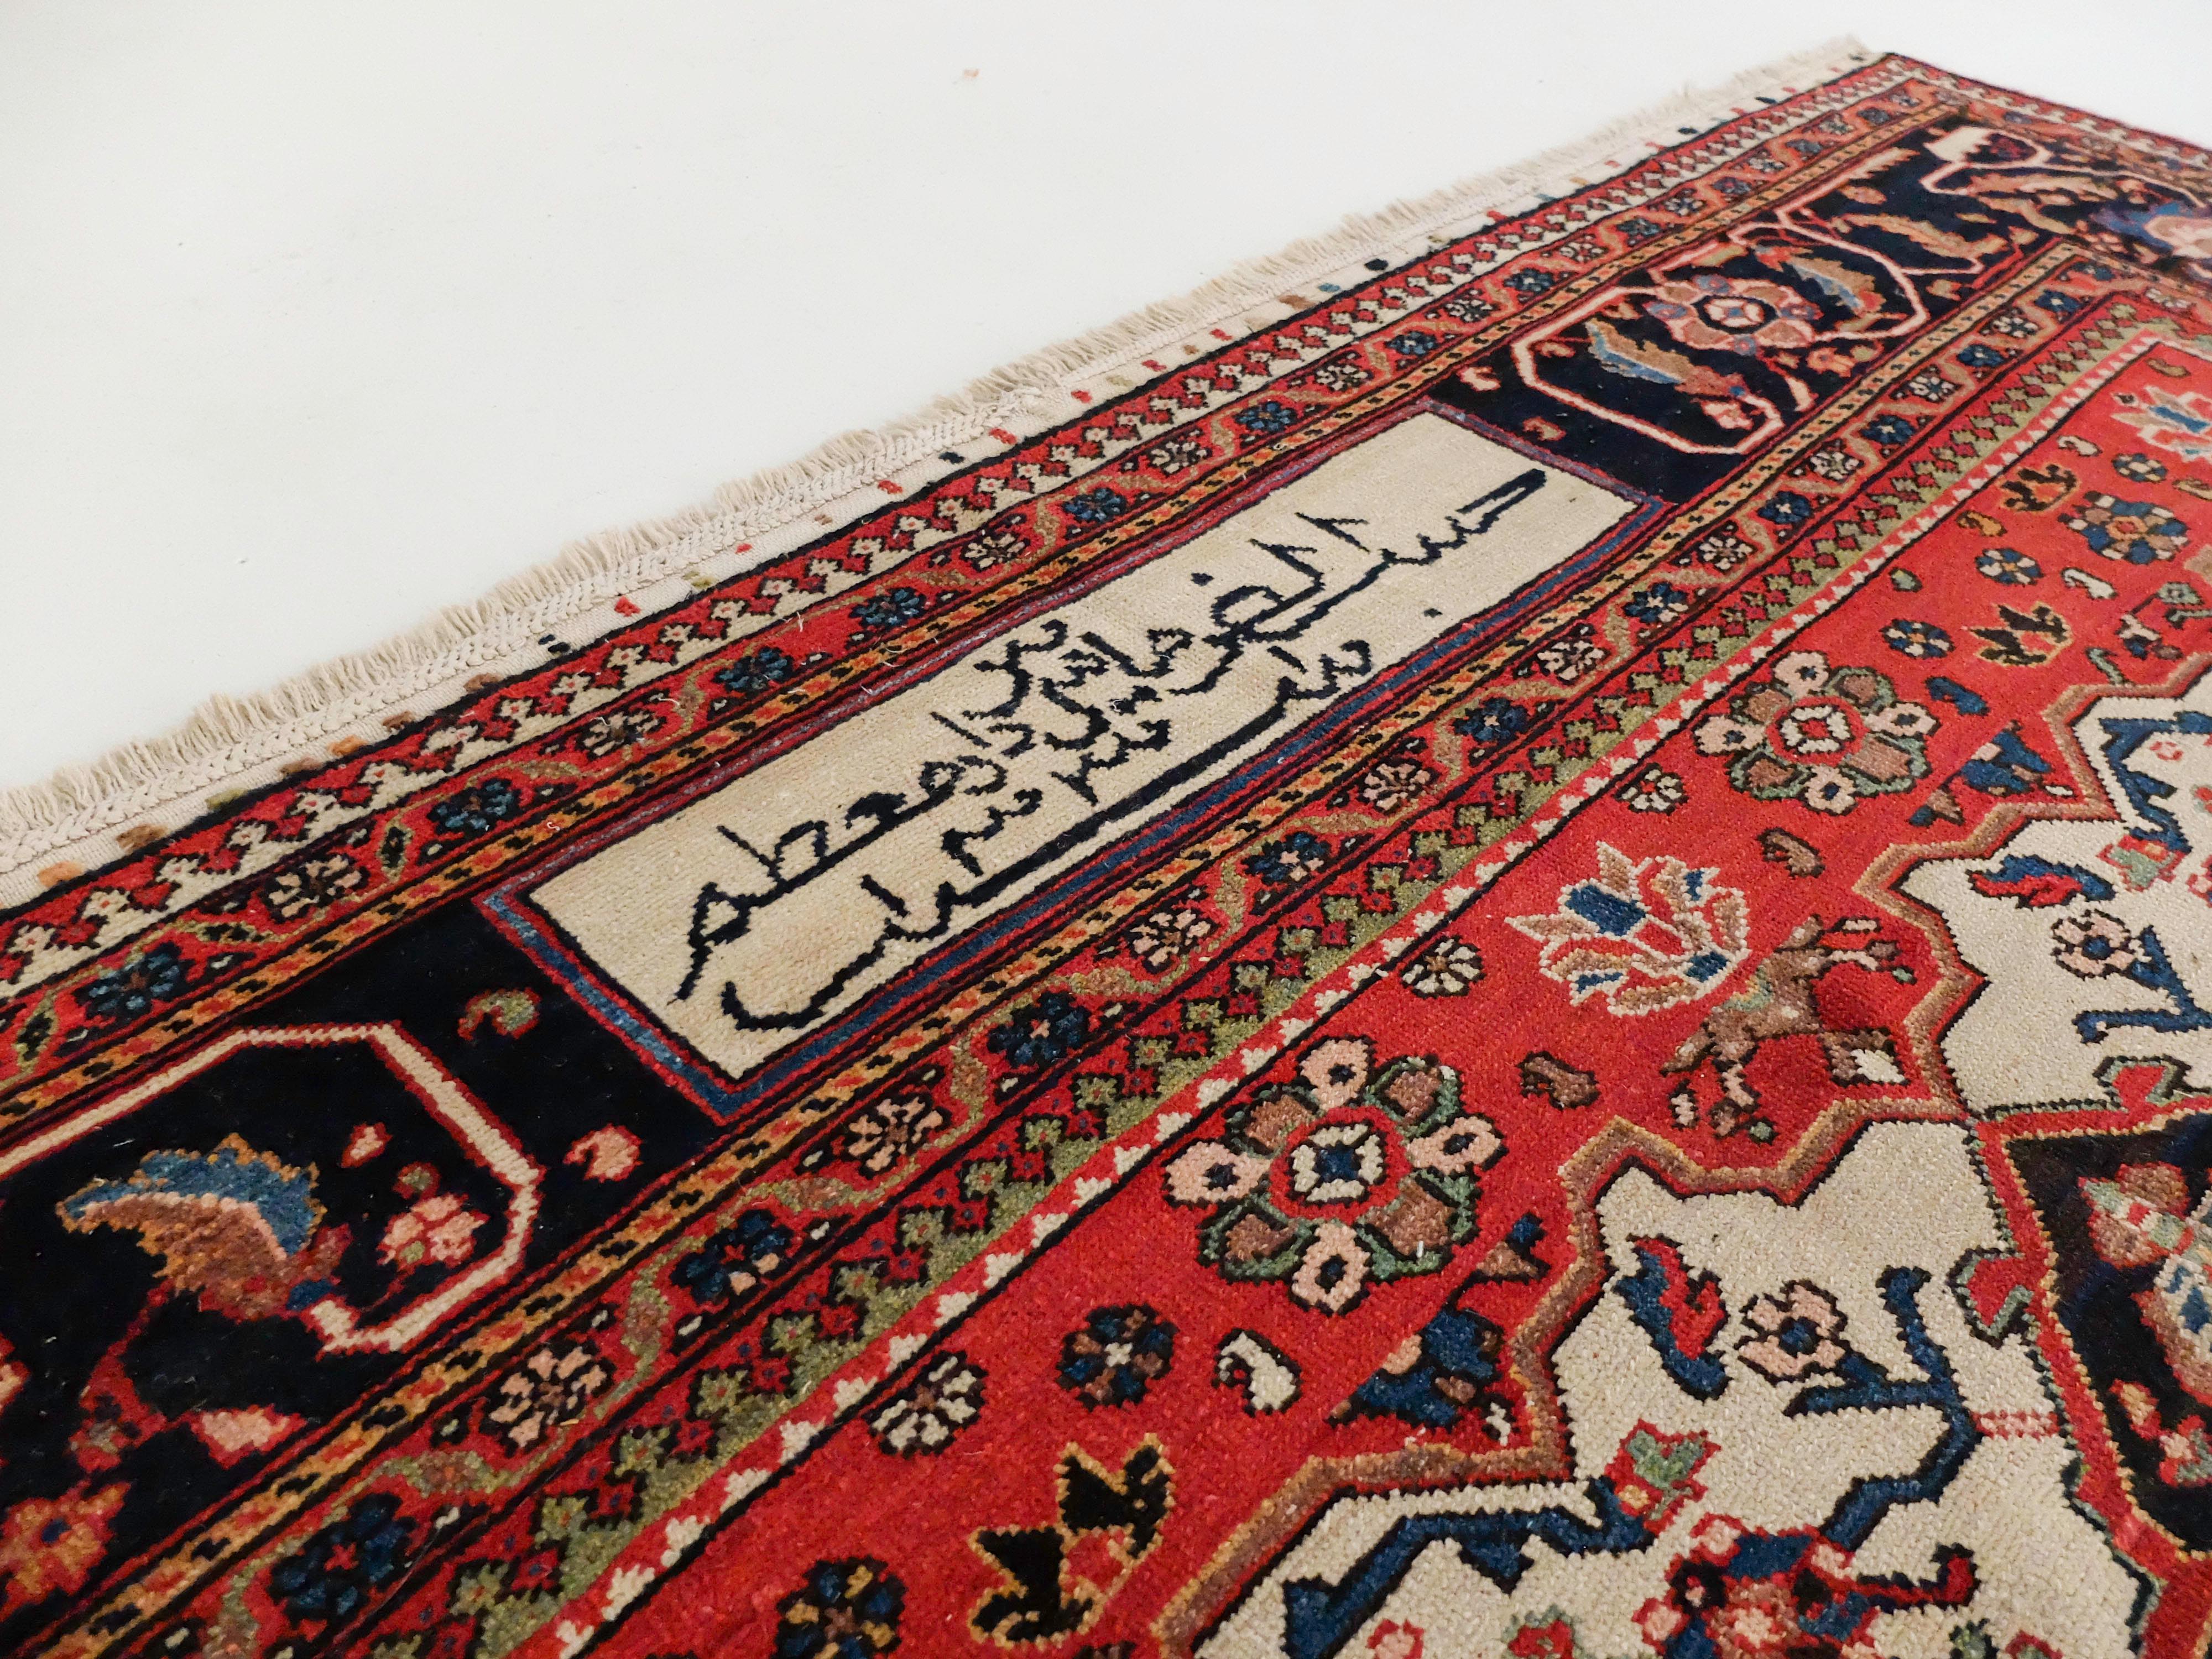 This absolutely stunning antique Bakhtiari Rug is in great condition for its age. Its colors are still highly saturated and extremely eye-catching. The way the black grounds the red which is even further highlighted by the cream is an example of a